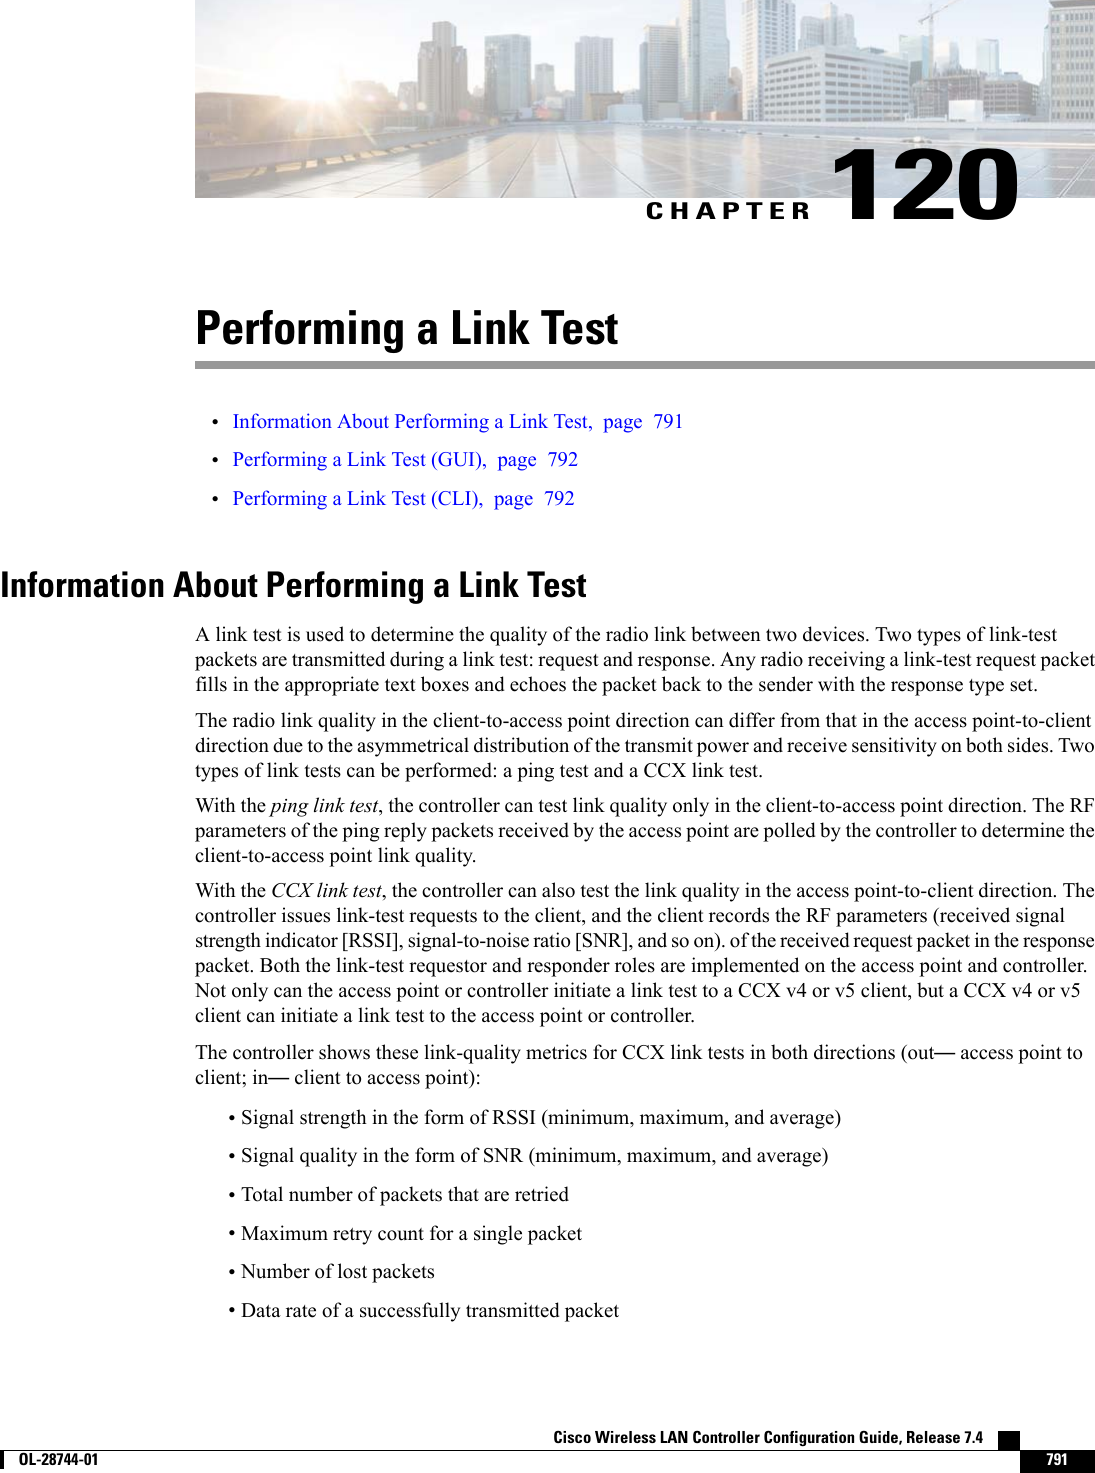 CHAPTER 120Performing a Link Test•Information About Performing a Link Test, page 791•Performing a Link Test (GUI), page 792•Performing a Link Test (CLI), page 792Information About Performing a Link TestA link test is used to determine the quality of the radio link between two devices. Two types of link-testpackets are transmitted during a link test: request and response. Any radio receiving a link-test request packetfills in the appropriate text boxes and echoes the packet back to the sender with the response type set.The radio link quality in the client-to-access point direction can differ from that in the access point-to-clientdirection due to the asymmetrical distribution of the transmit power and receive sensitivity on both sides. Twotypes of link tests can be performed: a ping test and a CCX link test.With the ping link test, the controller can test link quality only in the client-to-access point direction. The RFparameters of the ping reply packets received by the access point are polled by the controller to determine theclient-to-access point link quality.With the CCX link test, the controller can also test the link quality in the access point-to-client direction. Thecontroller issues link-test requests to the client, and the client records the RF parameters (received signalstrength indicator [RSSI], signal-to-noise ratio [SNR], and so on). of the received request packet in the responsepacket. Both the link-test requestor and responder roles are implemented on the access point and controller.Not only can the access point or controller initiate a link test to a CCX v4 or v5 client, but a CCX v4 or v5client can initiate a link test to the access point or controller.The controller shows these link-quality metrics for CCX link tests in both directions (out—access point toclient; in—client to access point):•Signal strength in the form of RSSI (minimum, maximum, and average)•Signal quality in the form of SNR (minimum, maximum, and average)•Total number of packets that are retried•Maximum retry count for a single packet•Number of lost packets•Data rate of a successfully transmitted packetCisco Wireless LAN Controller Configuration Guide, Release 7.4        OL-28744-01 791